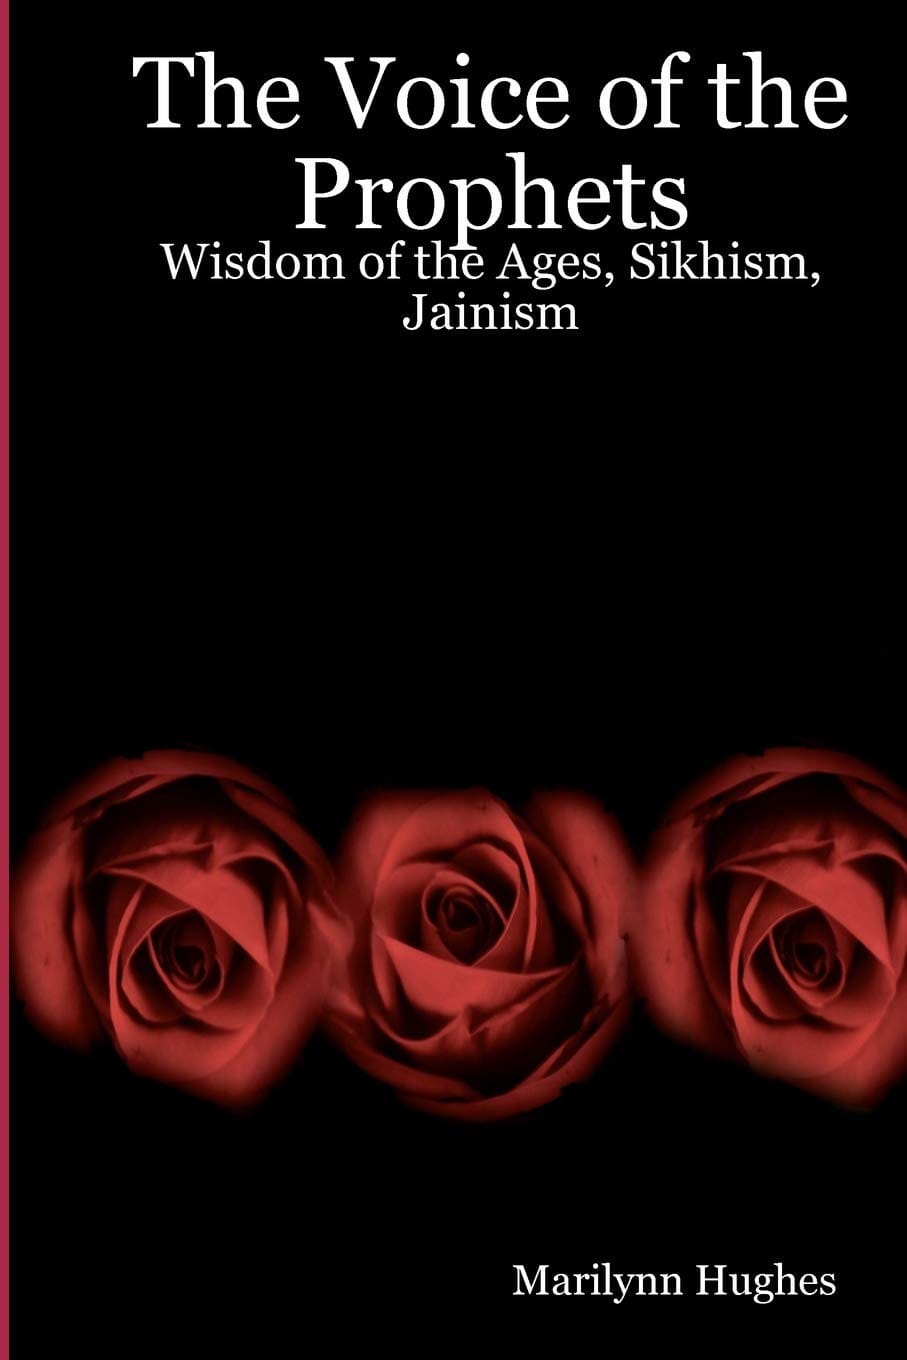 Wisdom of the Ages, Sikhism, Jainism, by Marilynn Hughes - An Encyclopedia of Ancient Sacred Texts in Twelve Volumes - An Out-of-Body Travel Book